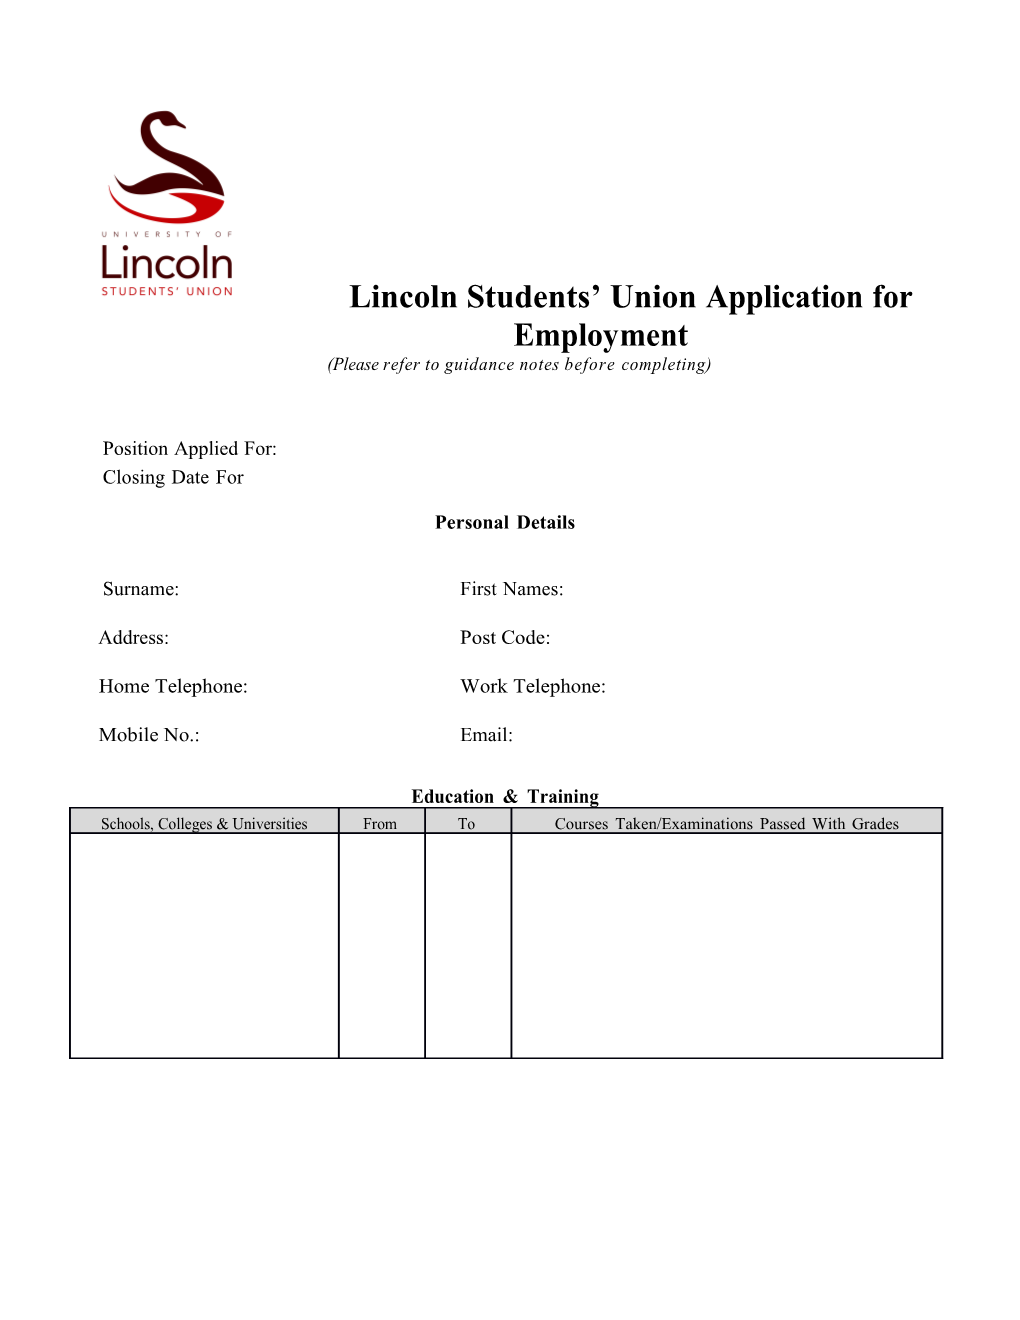 Lincoln Students Union Applicationforemployment